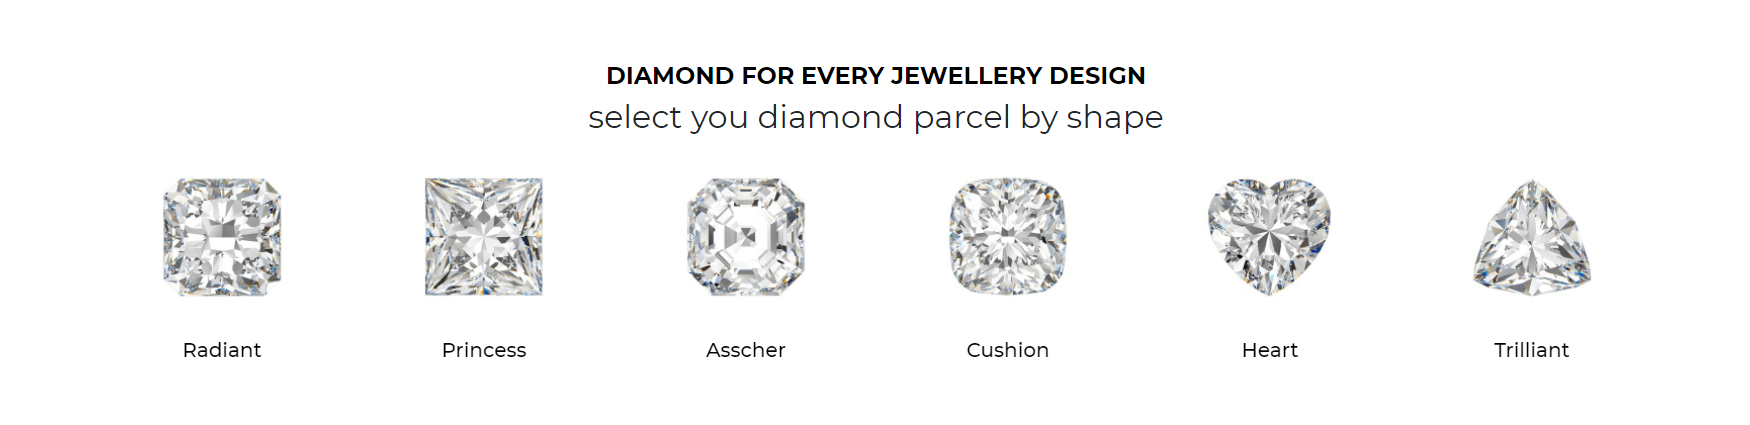 Select your diamonds by Shape